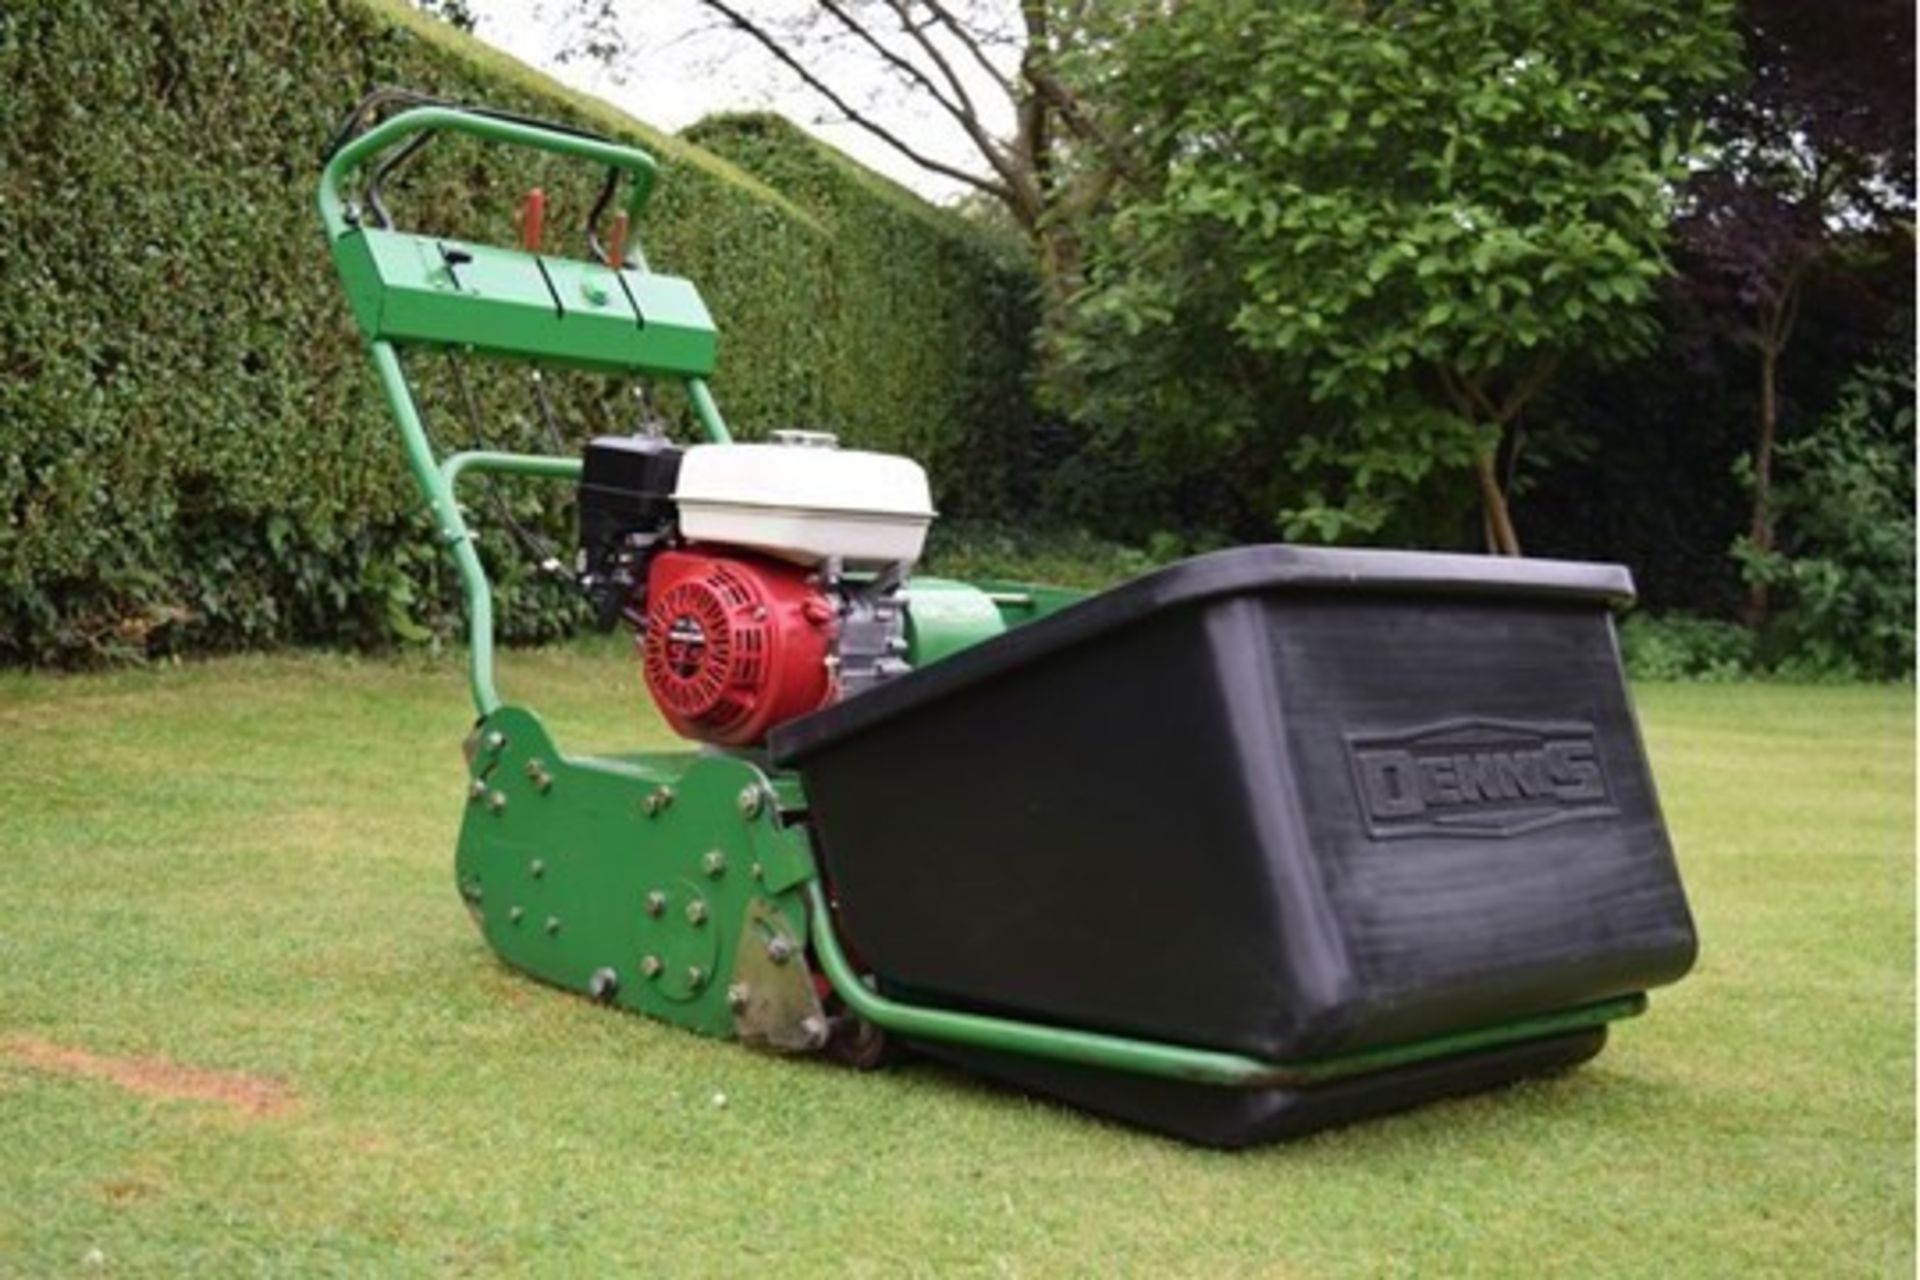 2004 Dennis G560 5 Blade Cylinder Mower With Grass Box - Image 5 of 12